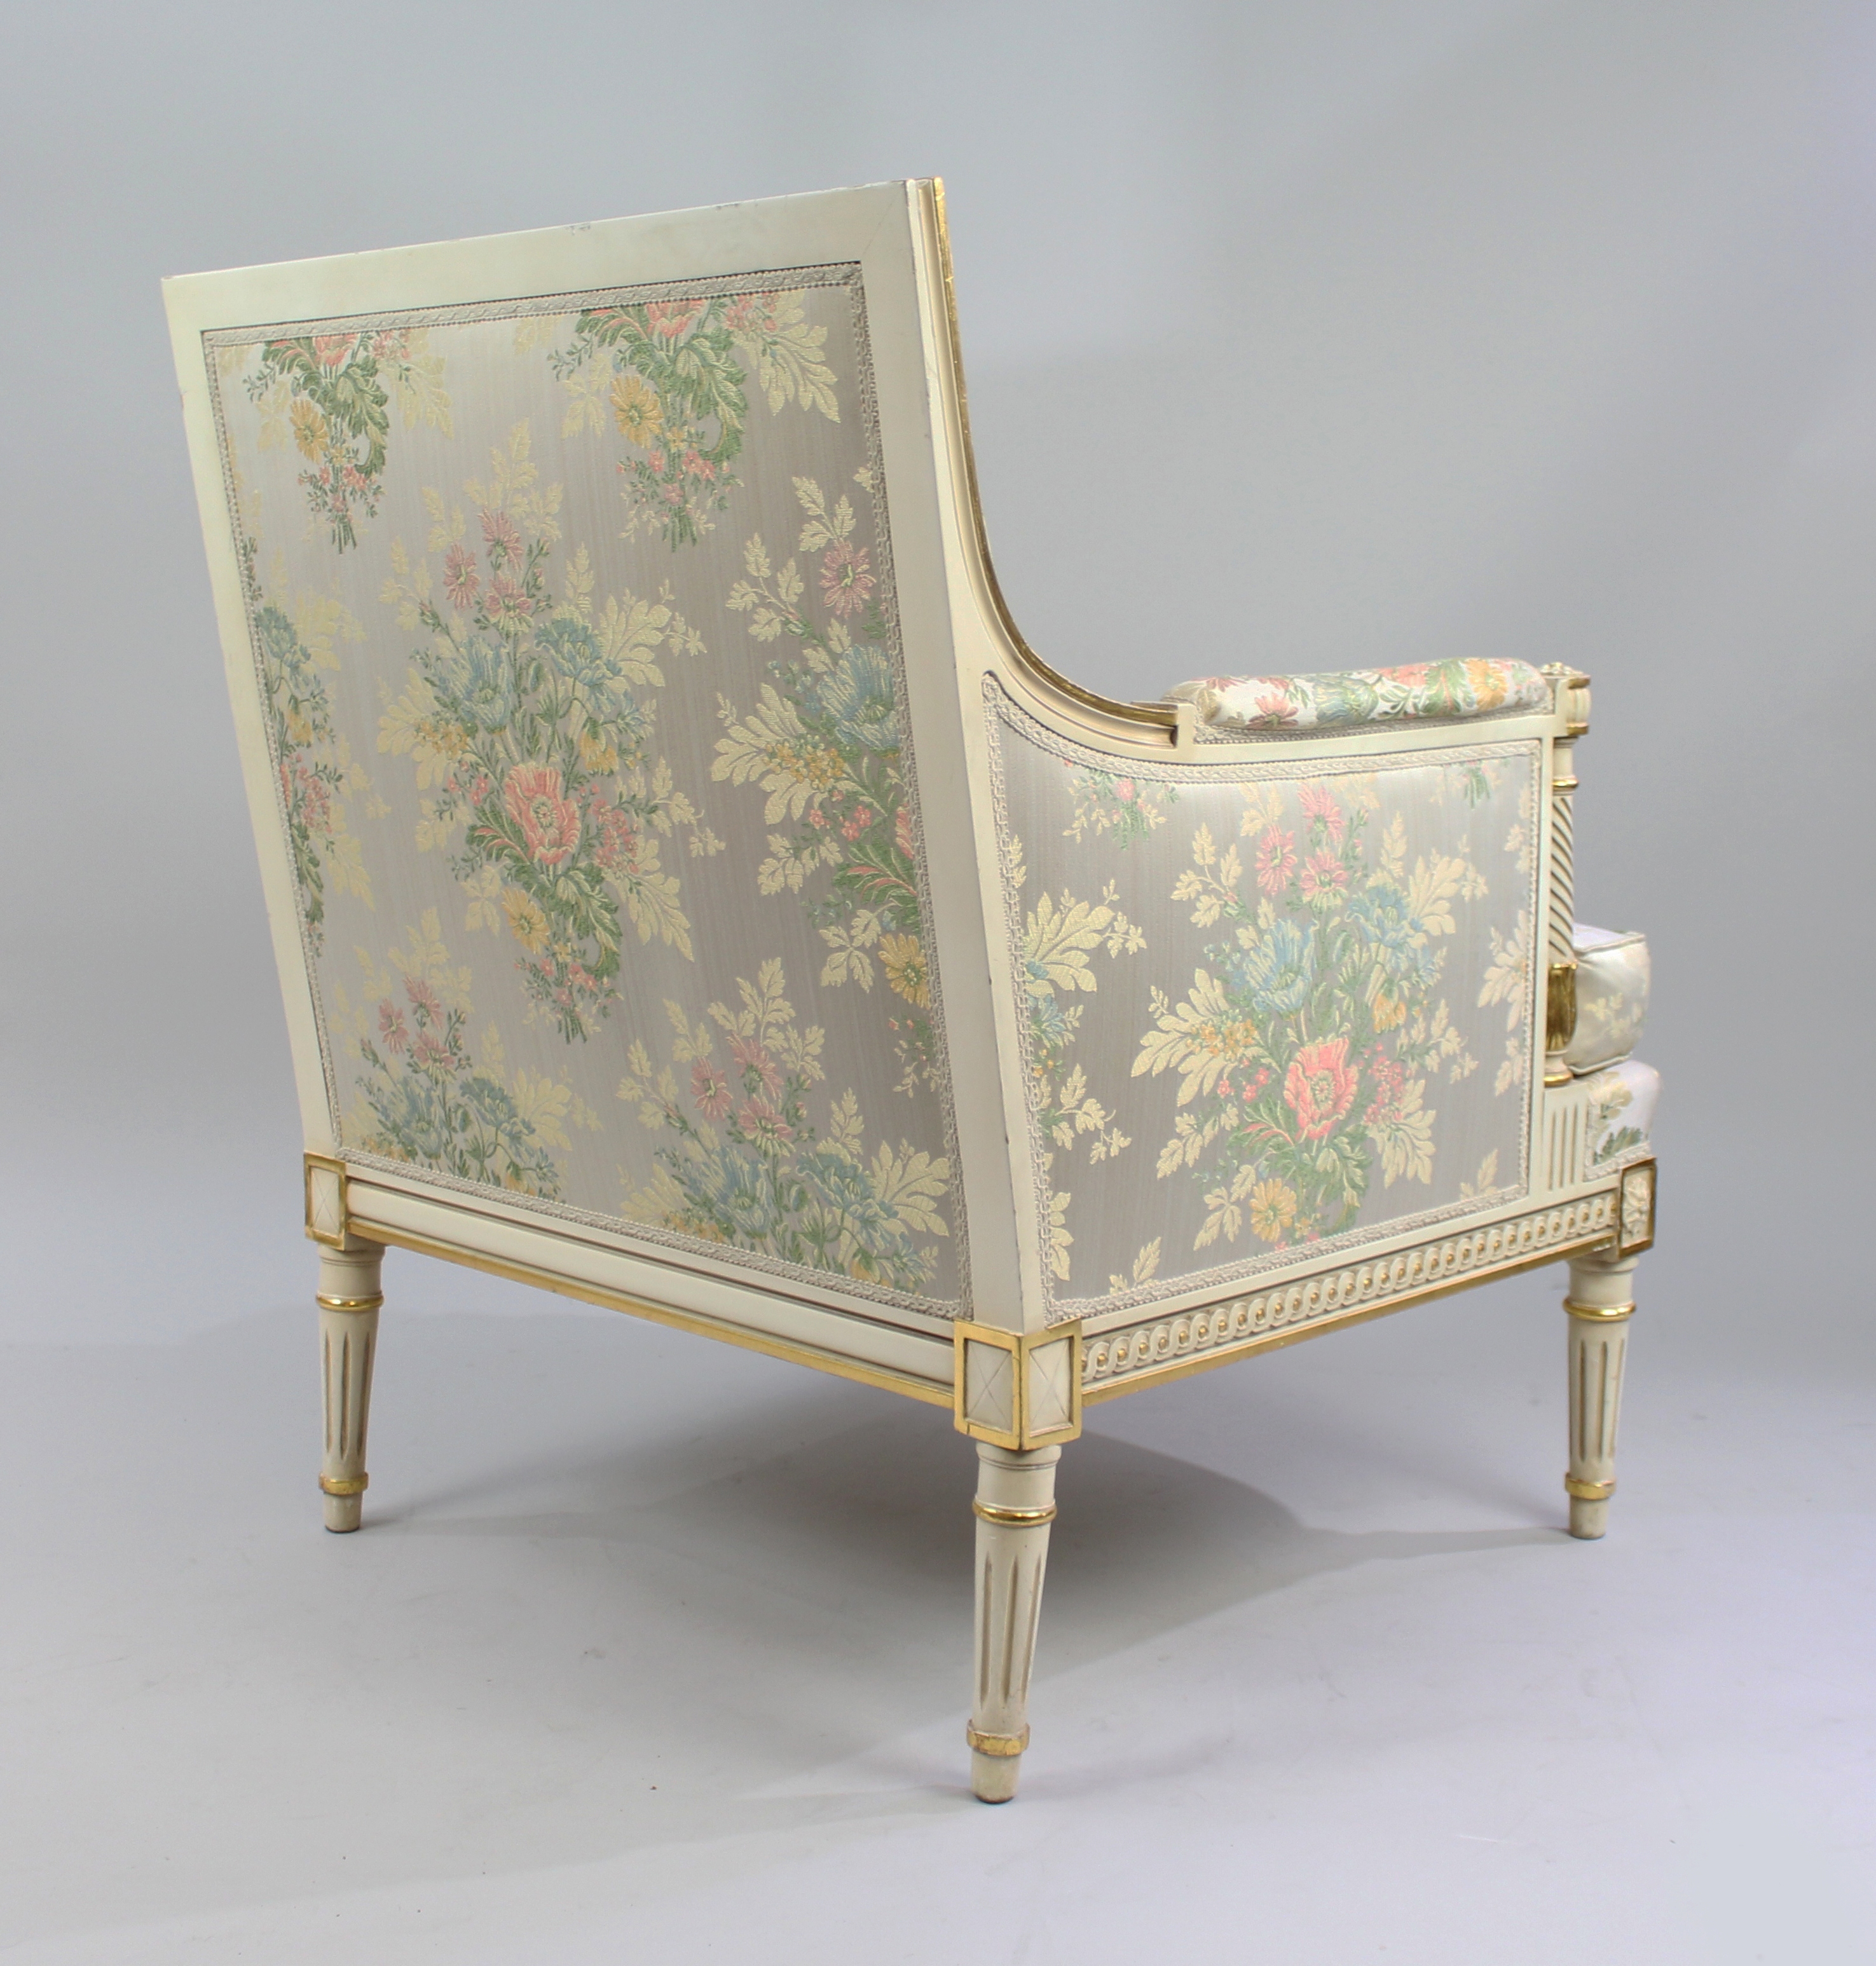 Italian Painted & Gilt Carved Wood Silik Upholstered Armchair - Image 2 of 2